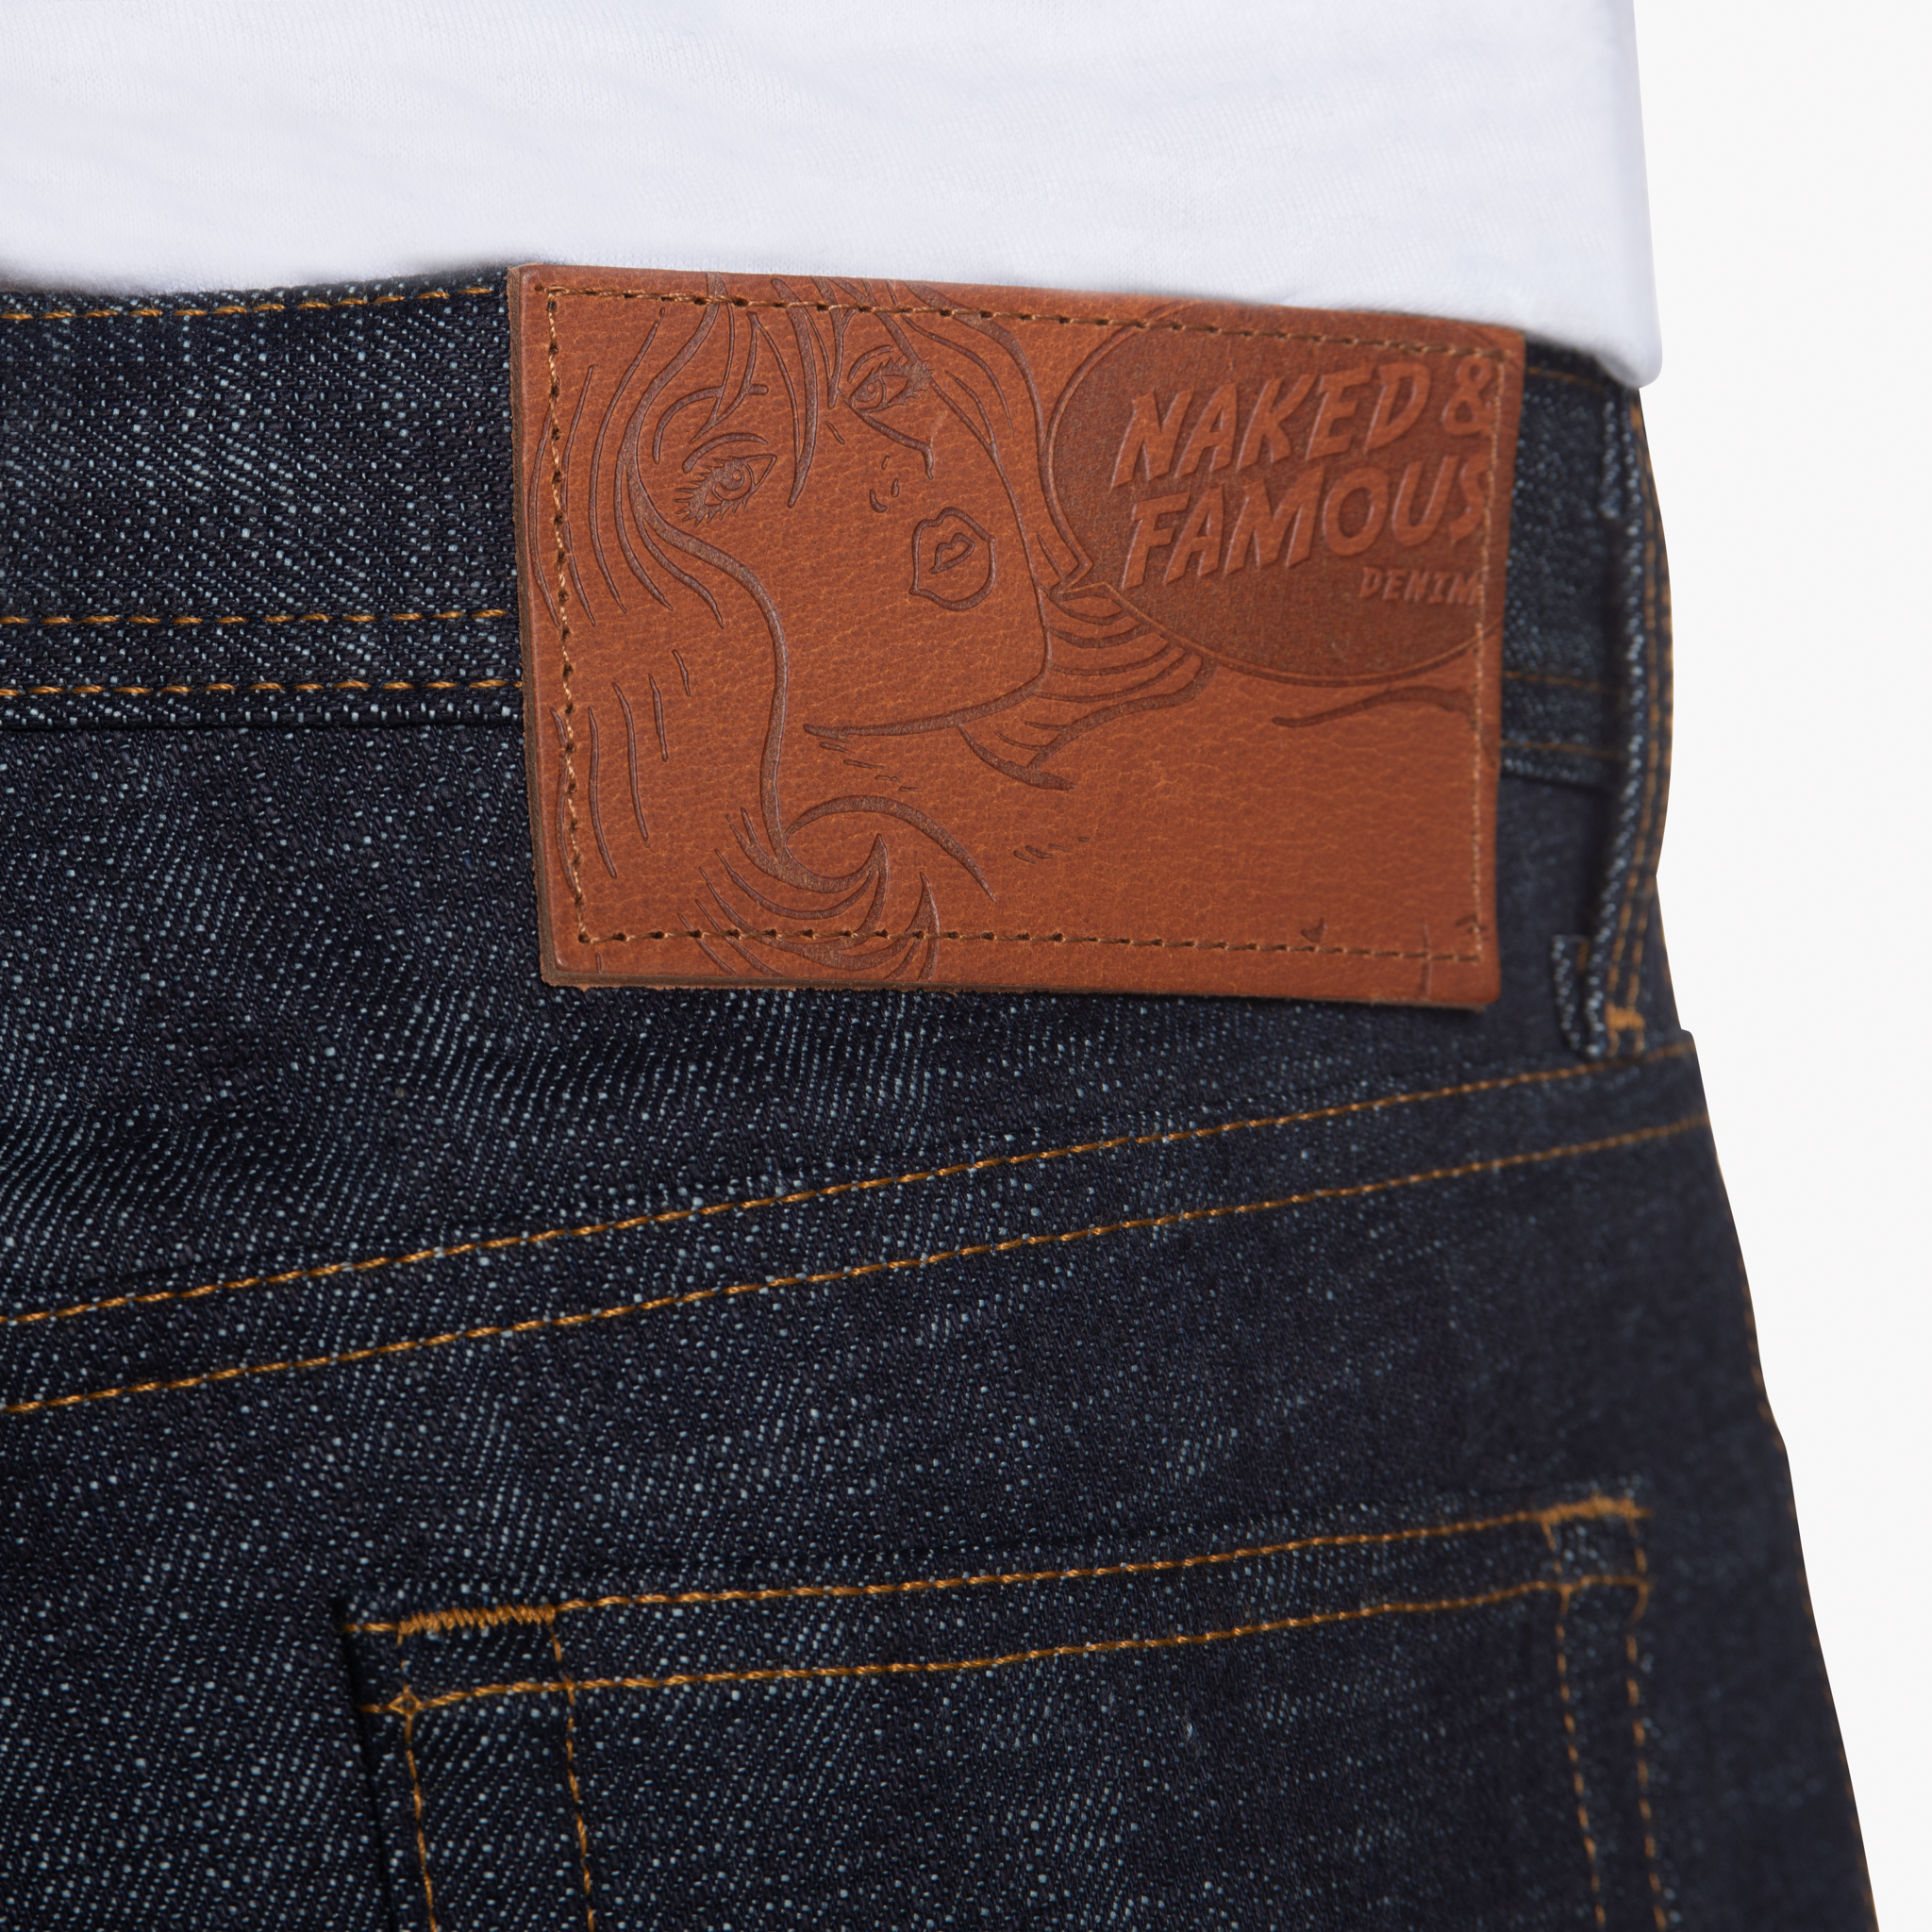  Firebird Selvedge jeans - leather patch 